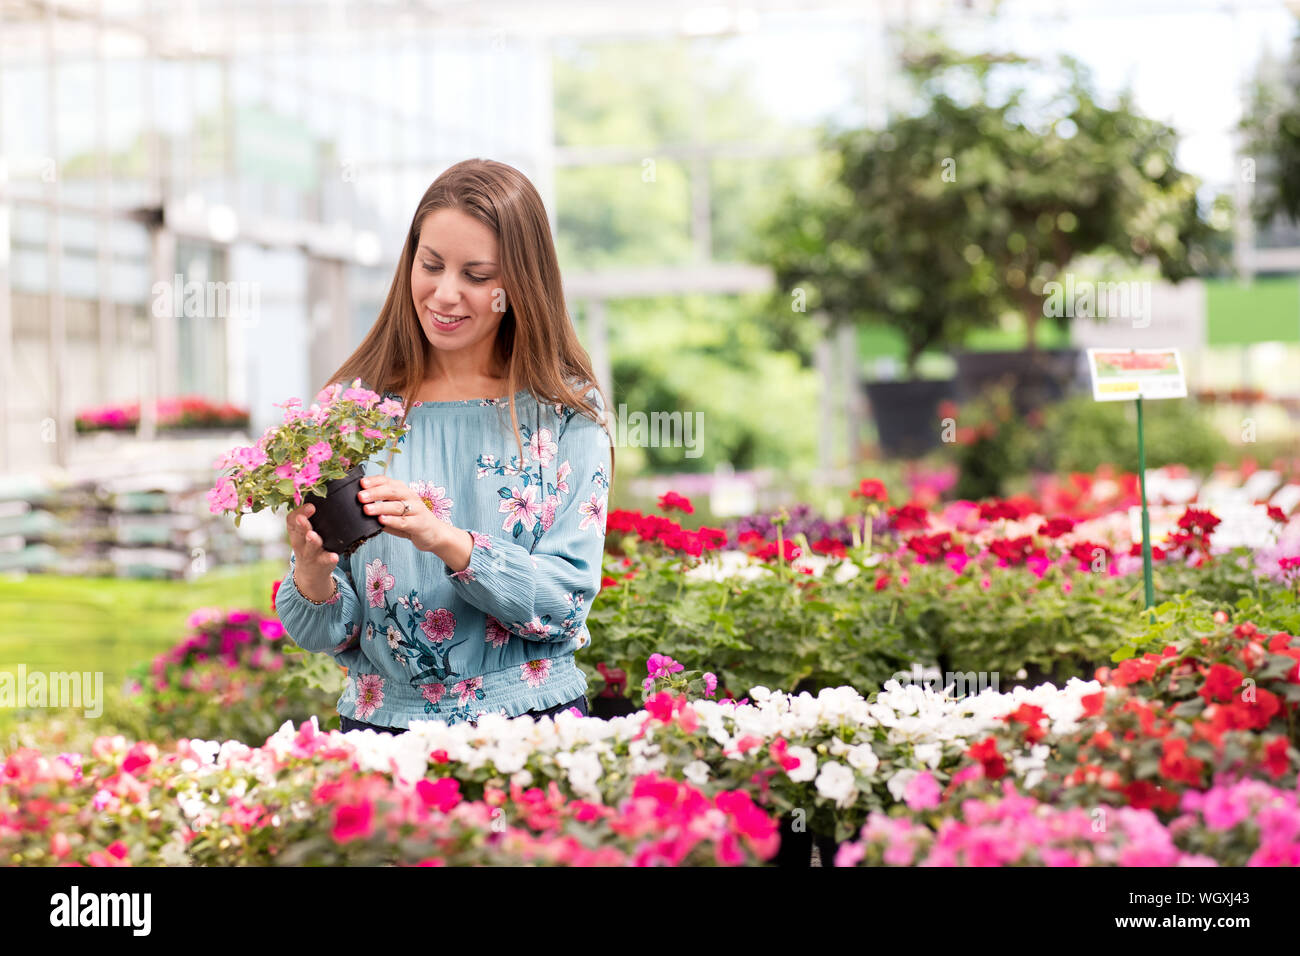 Pretty smiling young woman choosing potted flowering plants to purchase in a large nursery holding a pot of pink flowers in her hand Stock Photo